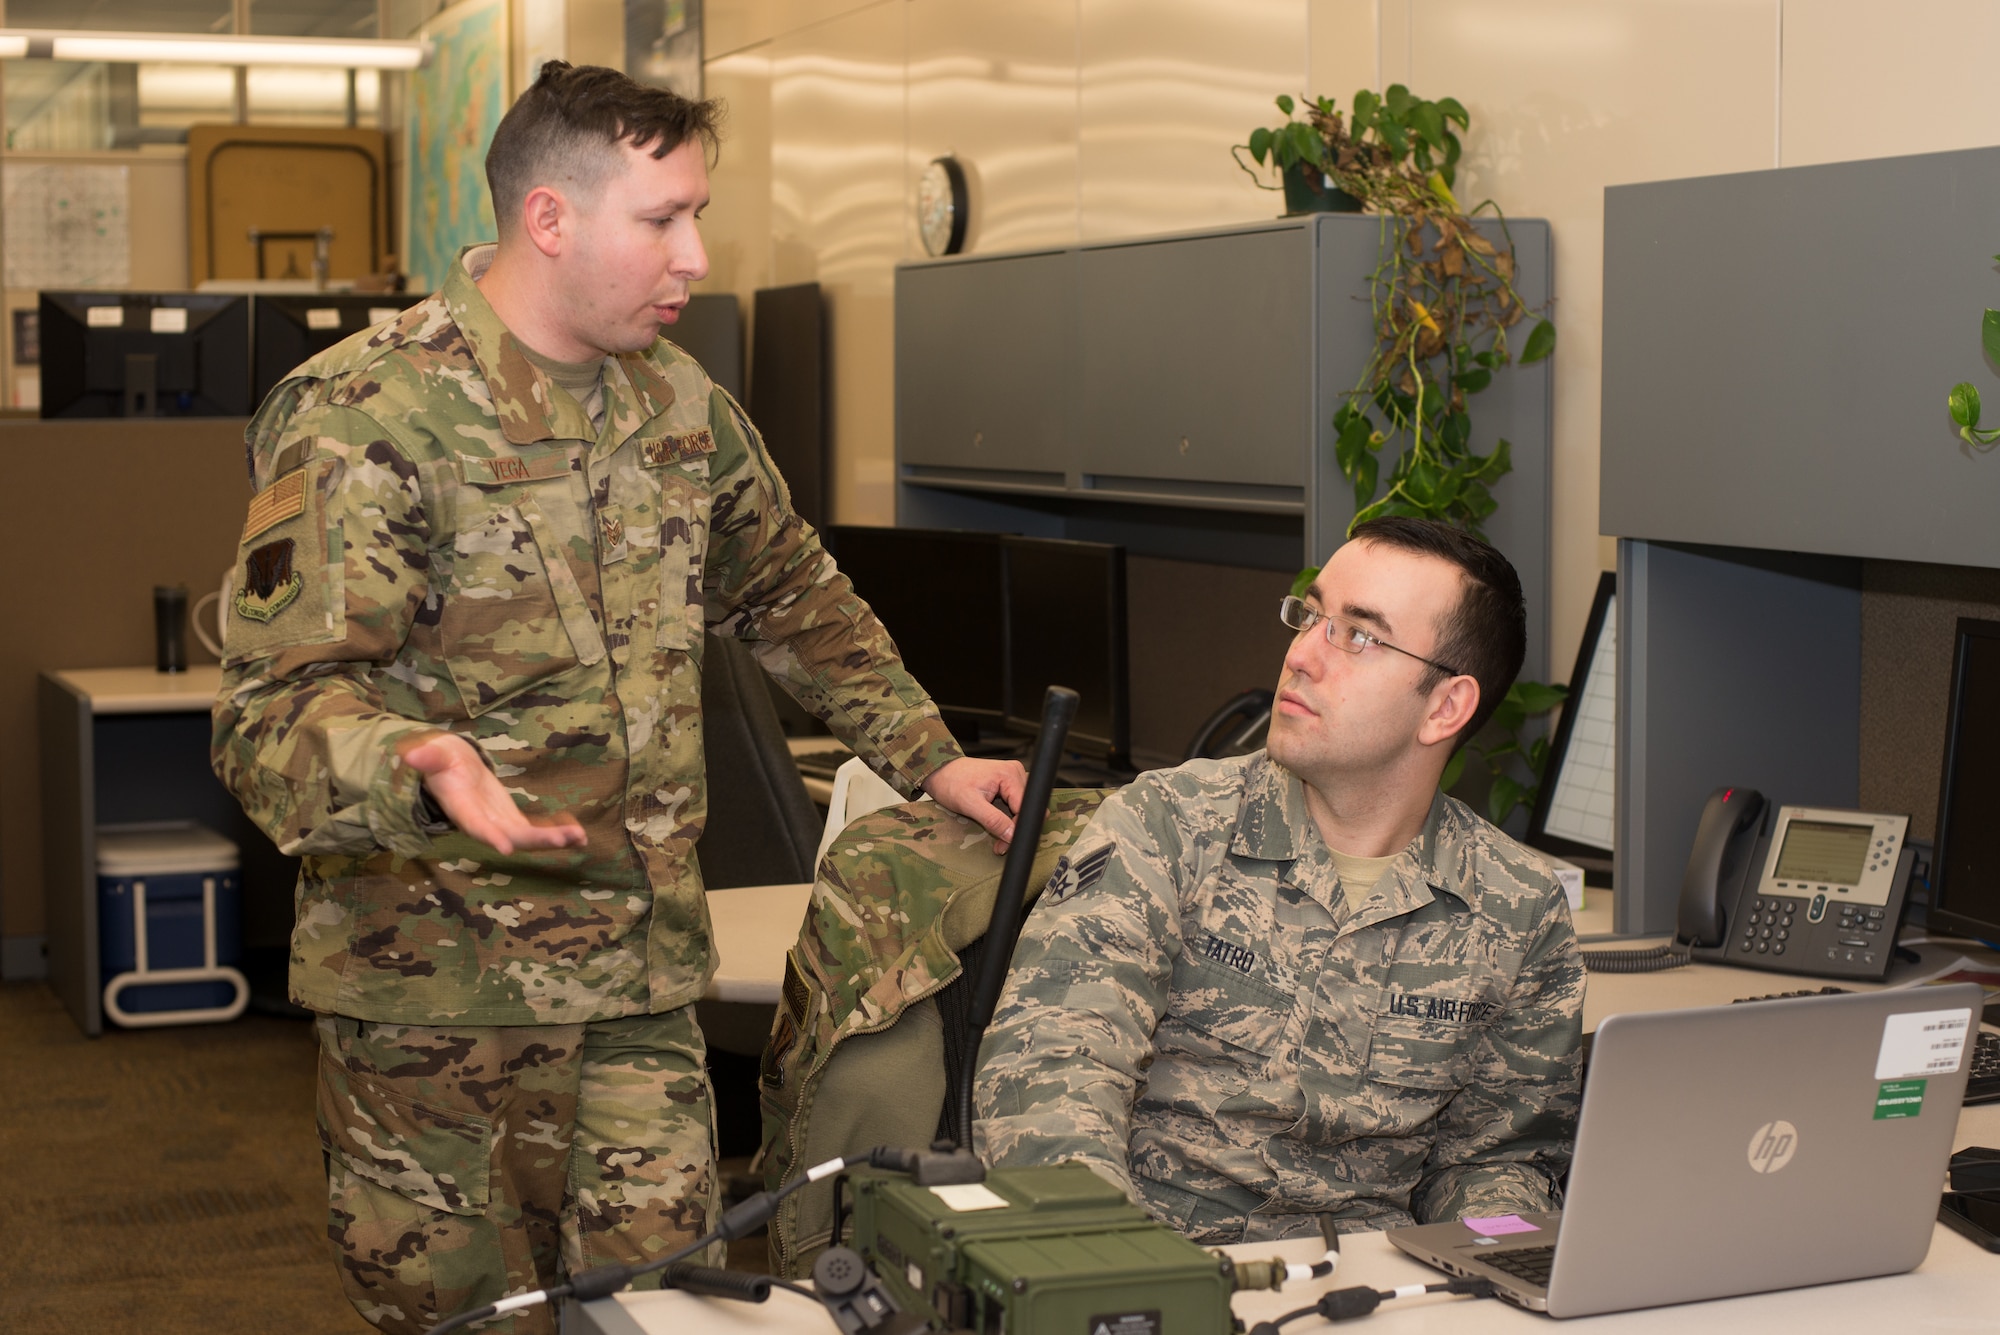 Staff Sgt. Victor Vega, 2nd Combat Weather Systems Squadron weather systems trainer, and Senior Airman Erik Tatro, 2nd Systems Operations Squadron alphanumerics collection technician, prepare for a test of the Exercise Adaptive Lightning 19, Task Force Bat Phone, at Offutt Air Force Base, Nebraska, Feb. 26, 2019. Using agile development techniques, the development team was able to successfully write and test a proof of concept in only seven weeks. (U.S. Air Force photo by Paul Shirk)